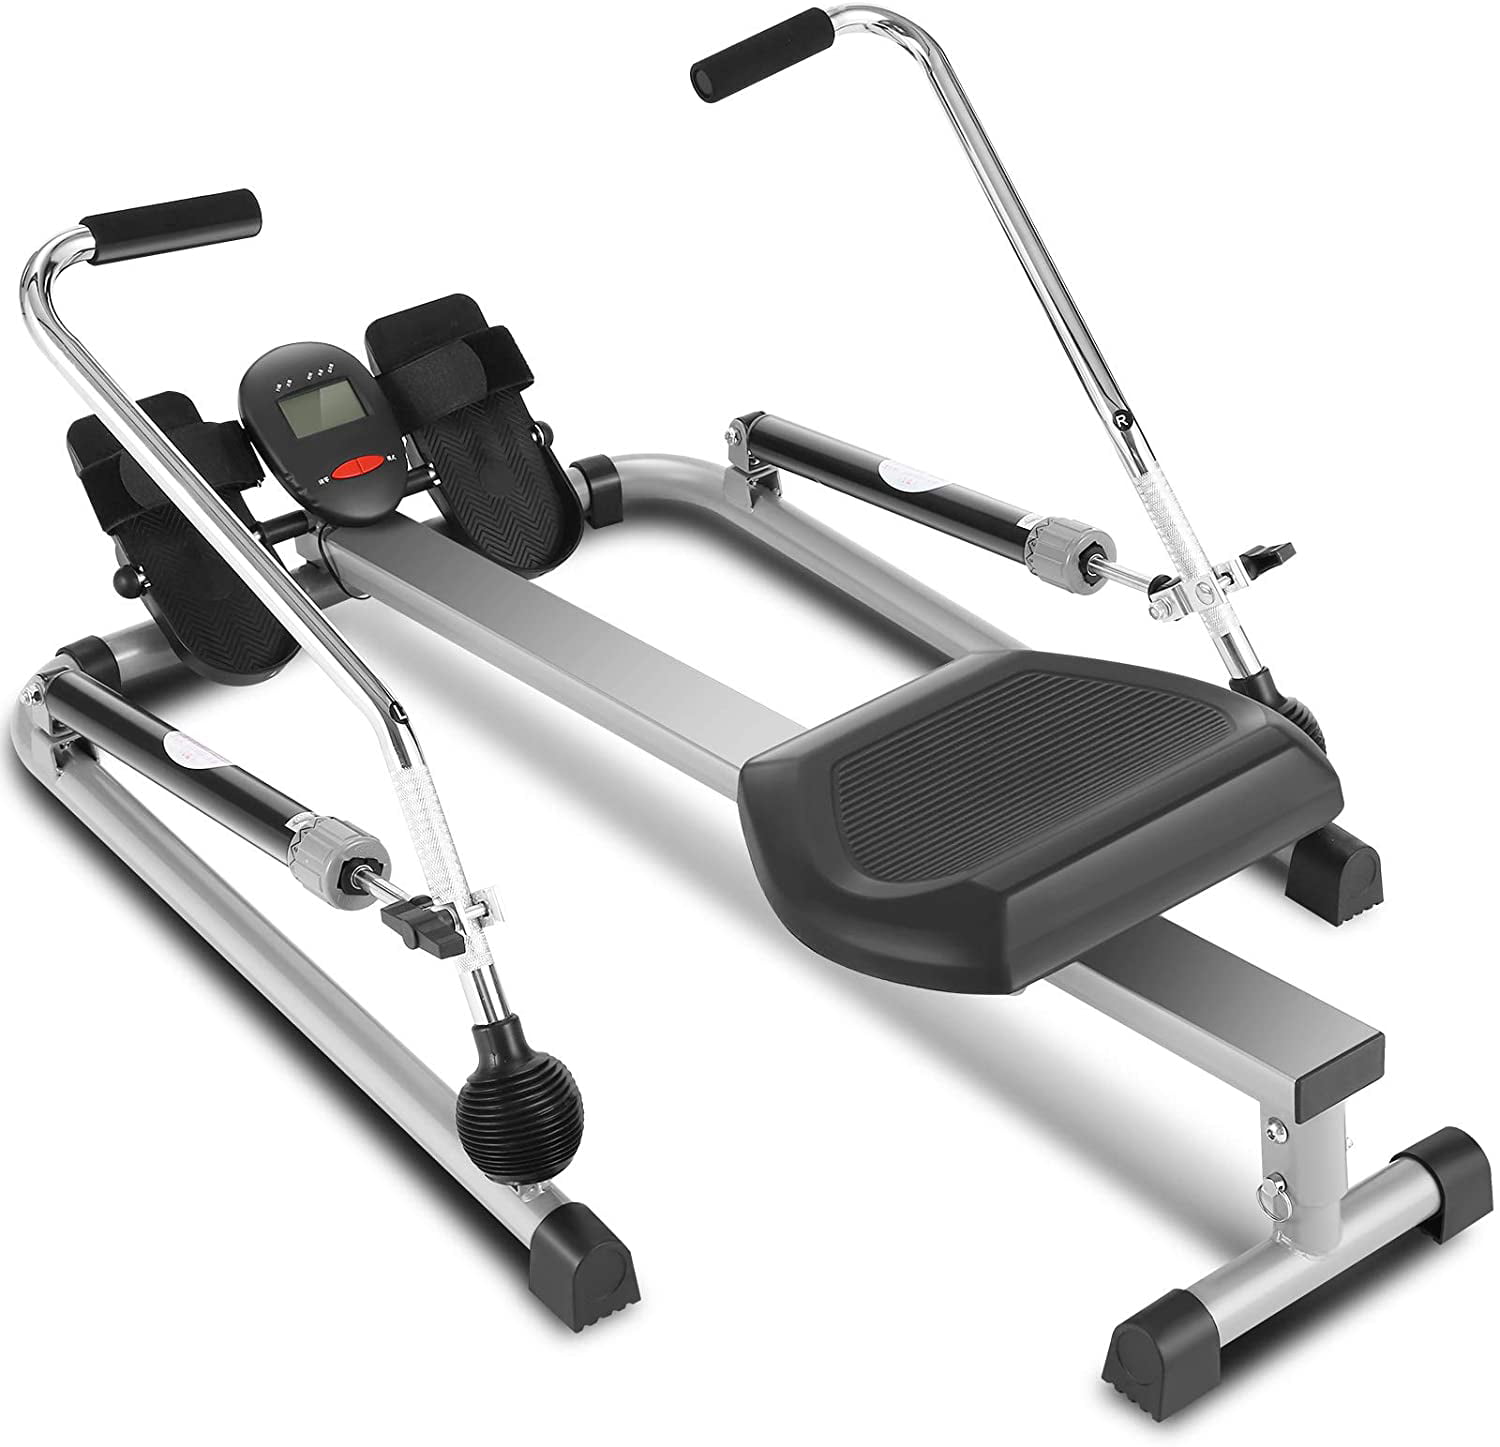 Details about   Hydraulic Rower Rowing Machine Adjustable Incline & 12 Resistance Cylinder USA 